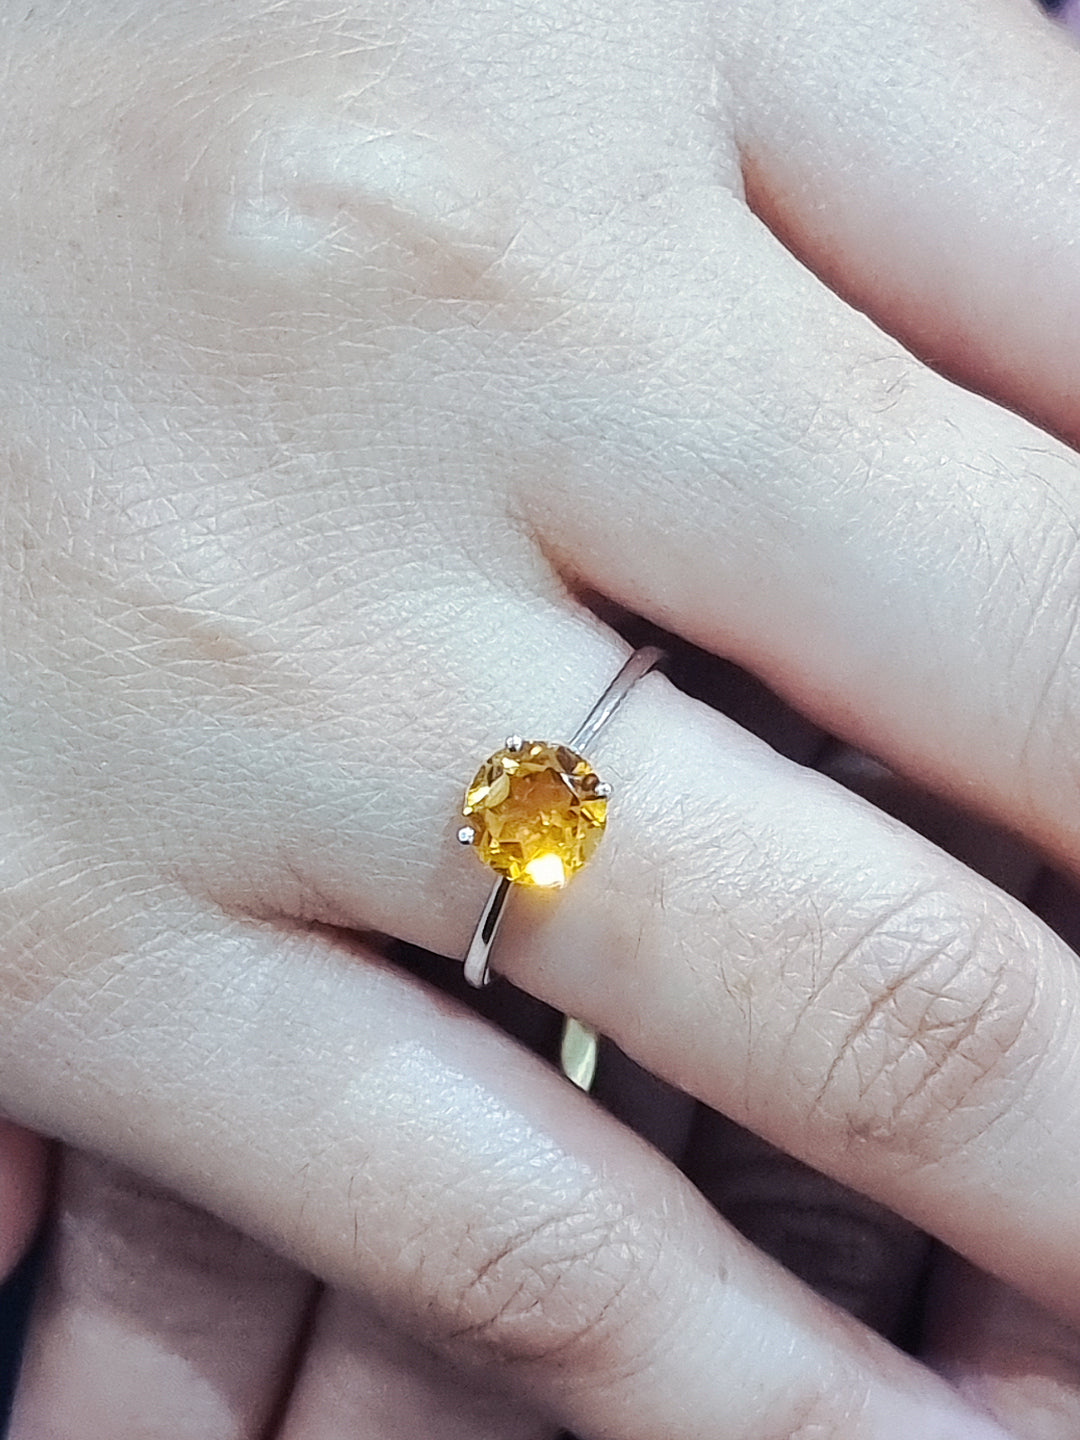 Solitaire Citrine Ring In 18k White Gold.